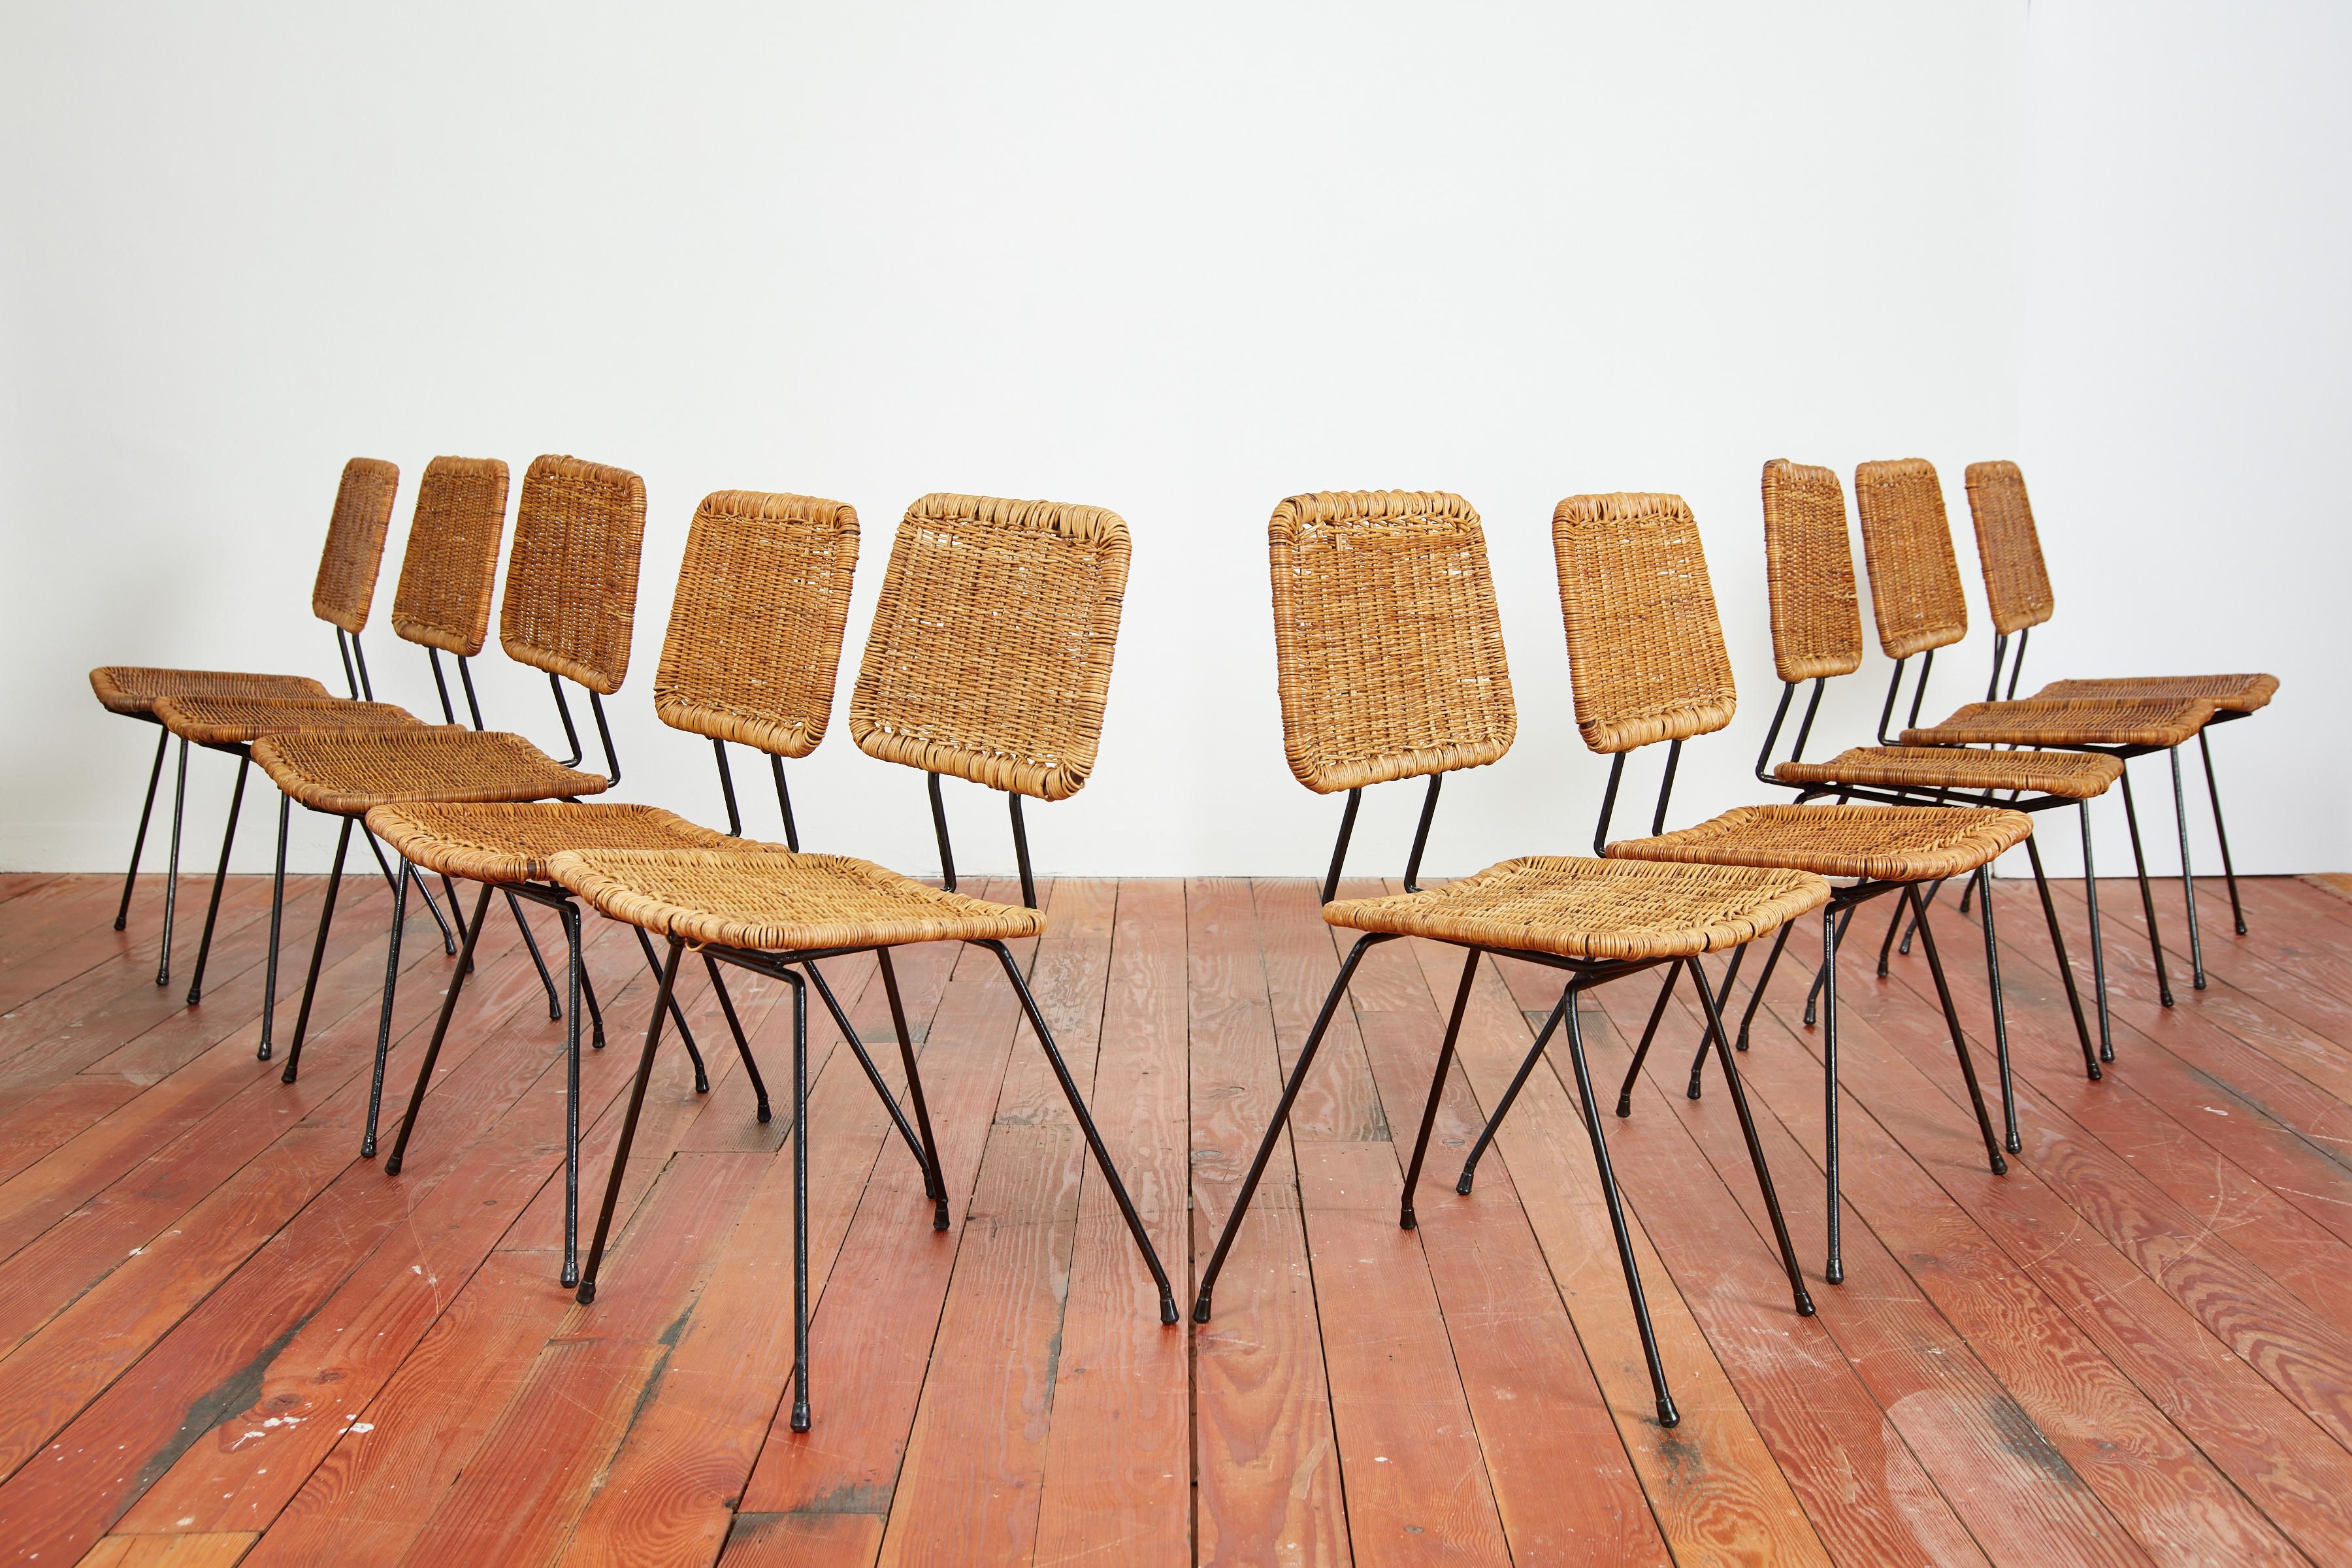 Set of 10 dining chairs by Dutch designer Dirk Van Sliedregt. 
Black iron bases with sculptural wicker seats and floating backs. 
